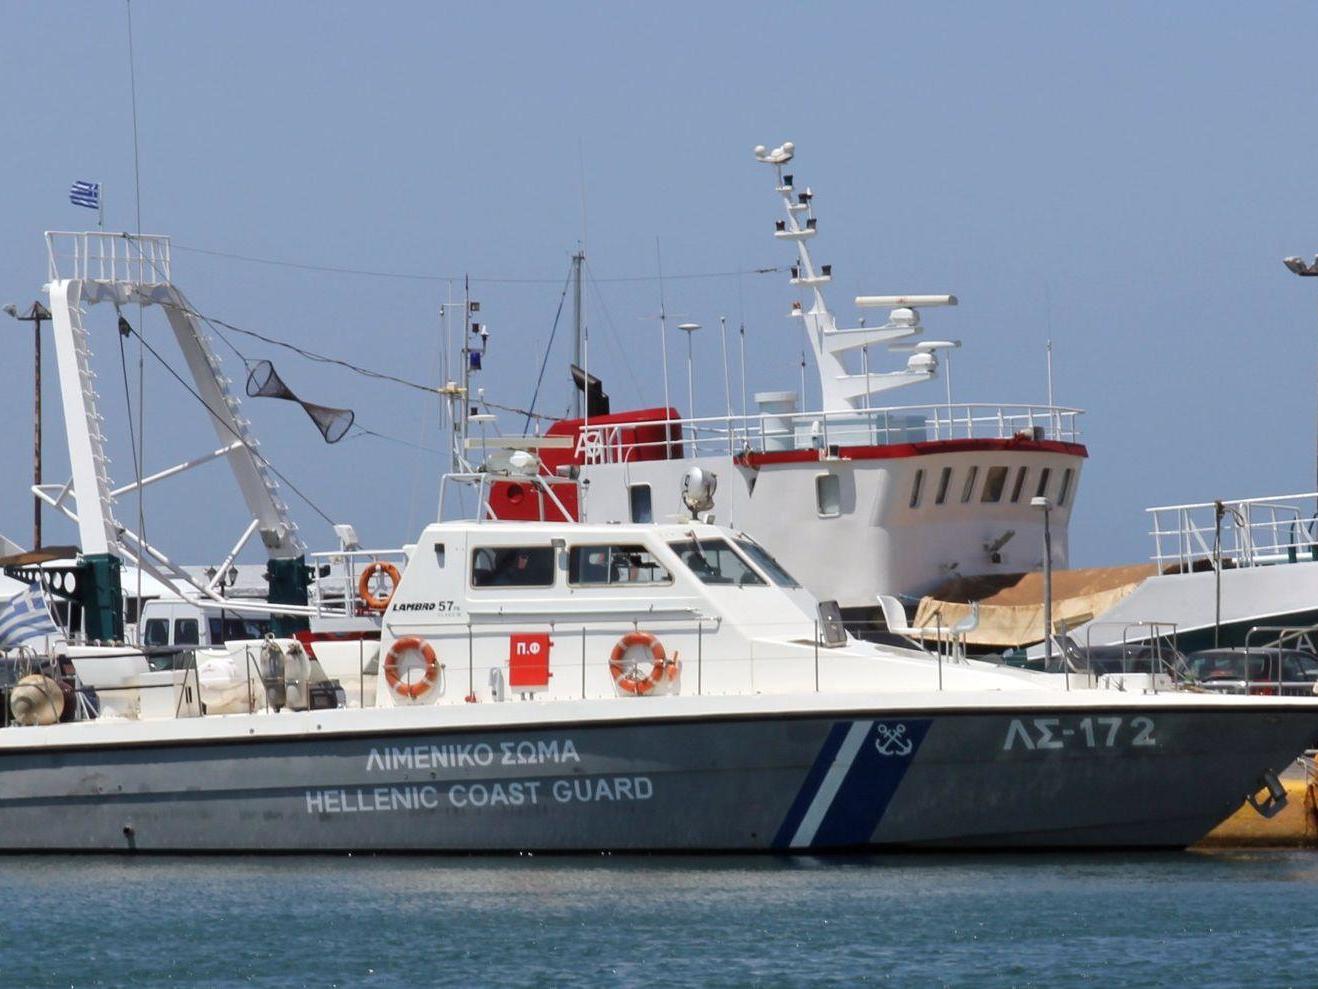 Majority of those rescued were transported to the nearby island of Rhodes, while some were taken to the smaller island of Karpathos